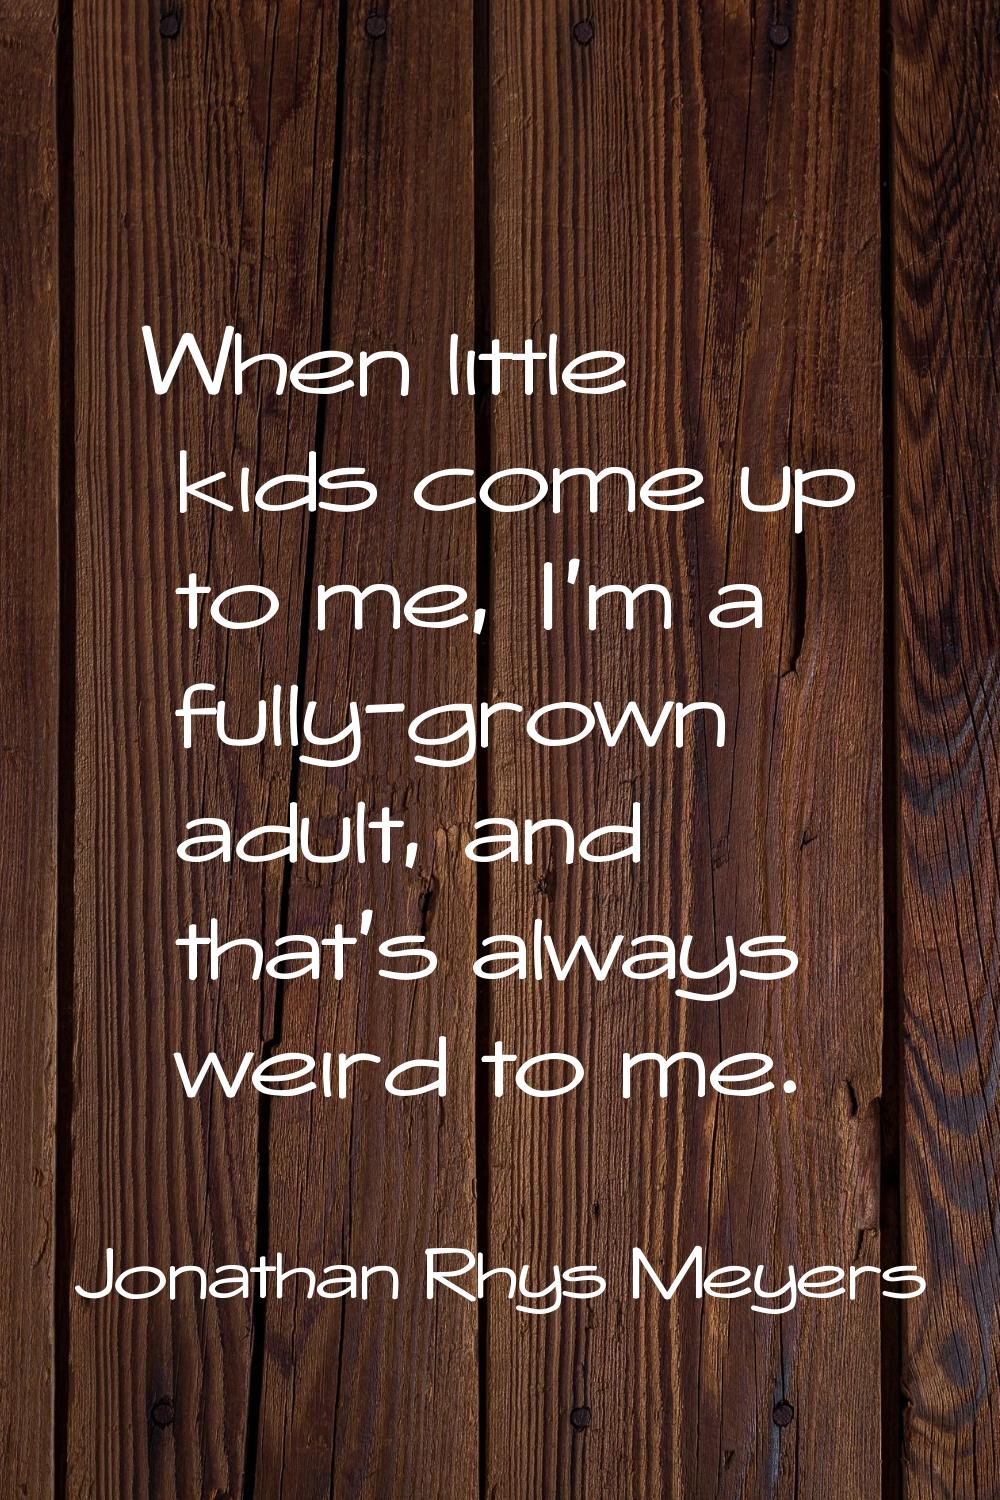 When little kids come up to me, I'm a fully-grown adult, and that's always weird to me.